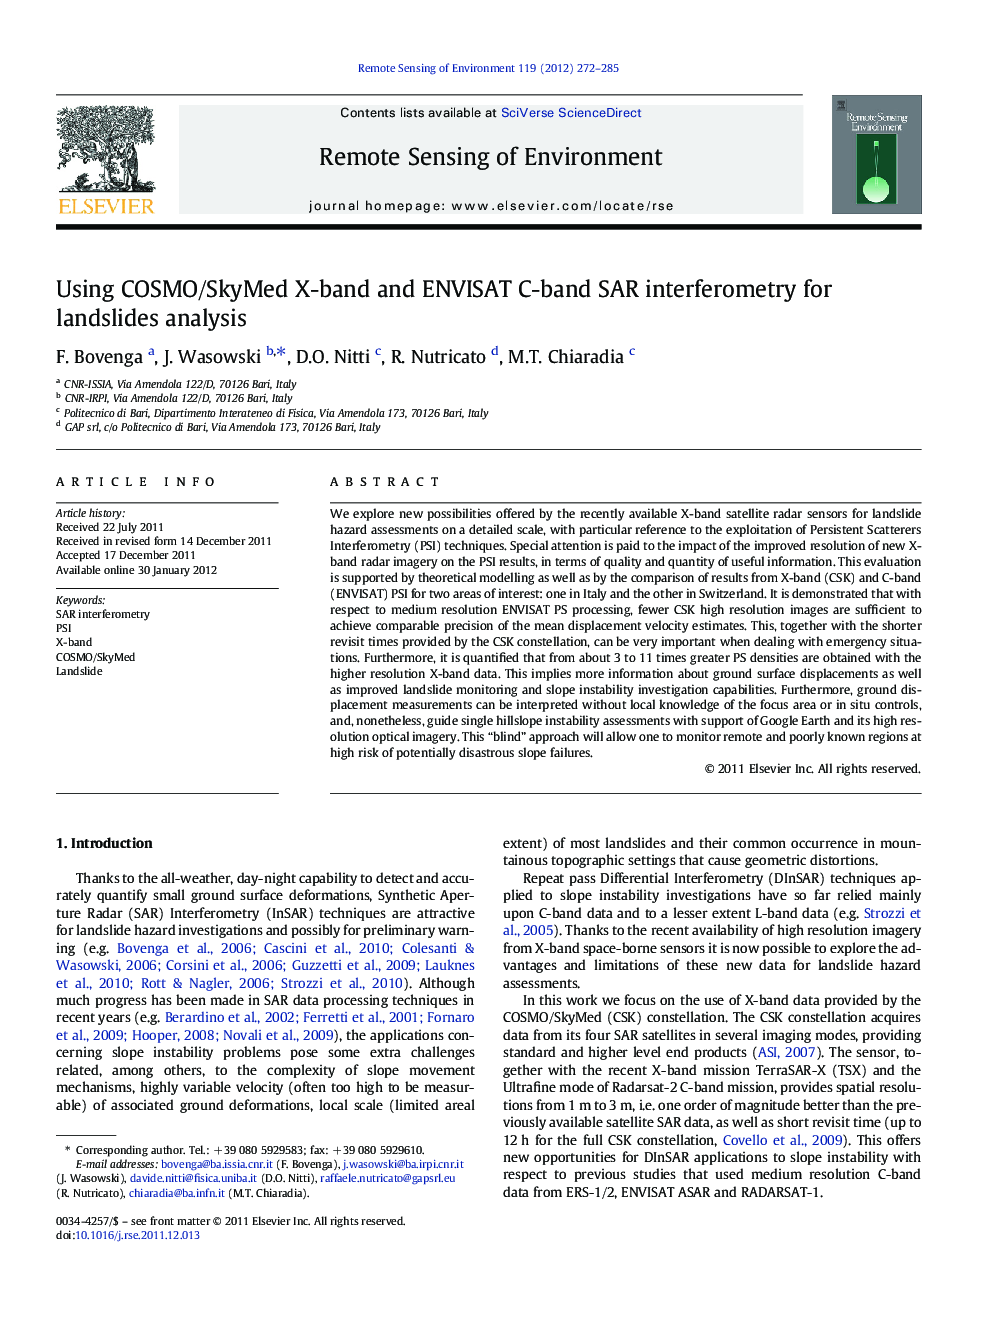 Using COSMO/SkyMed X-band and ENVISAT C-band SAR interferometry for landslides analysis